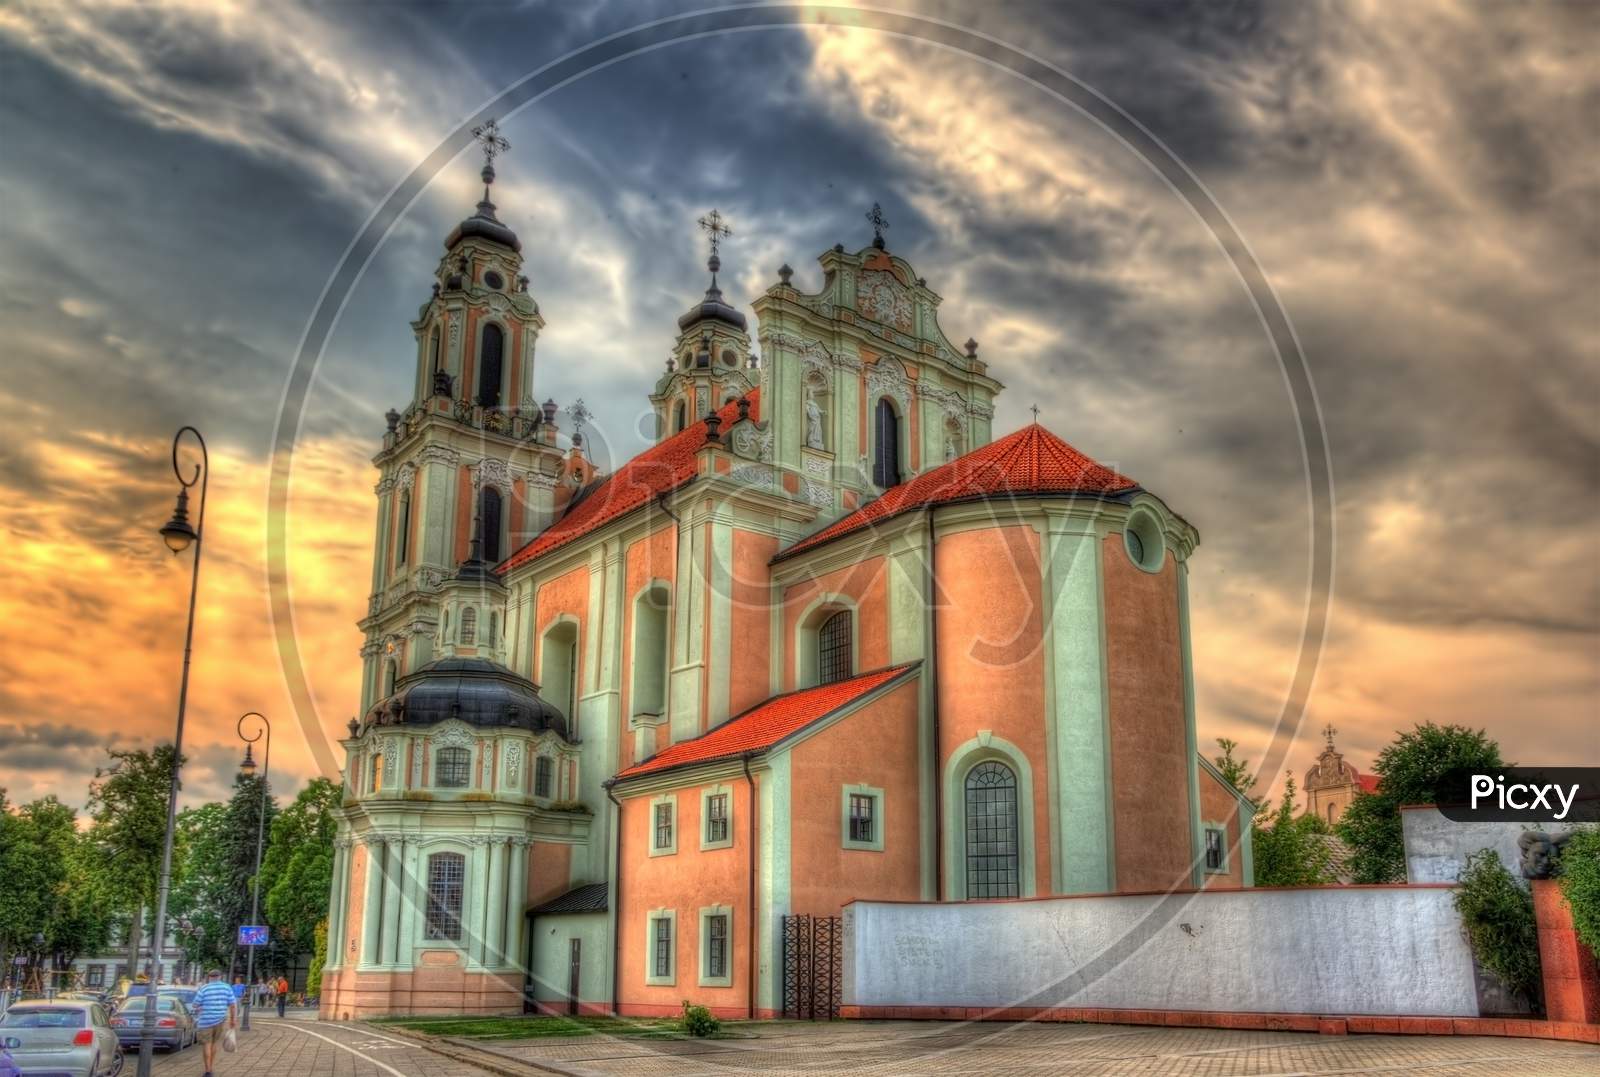 Church Of St. Catherine In Vilnius, Lithuania